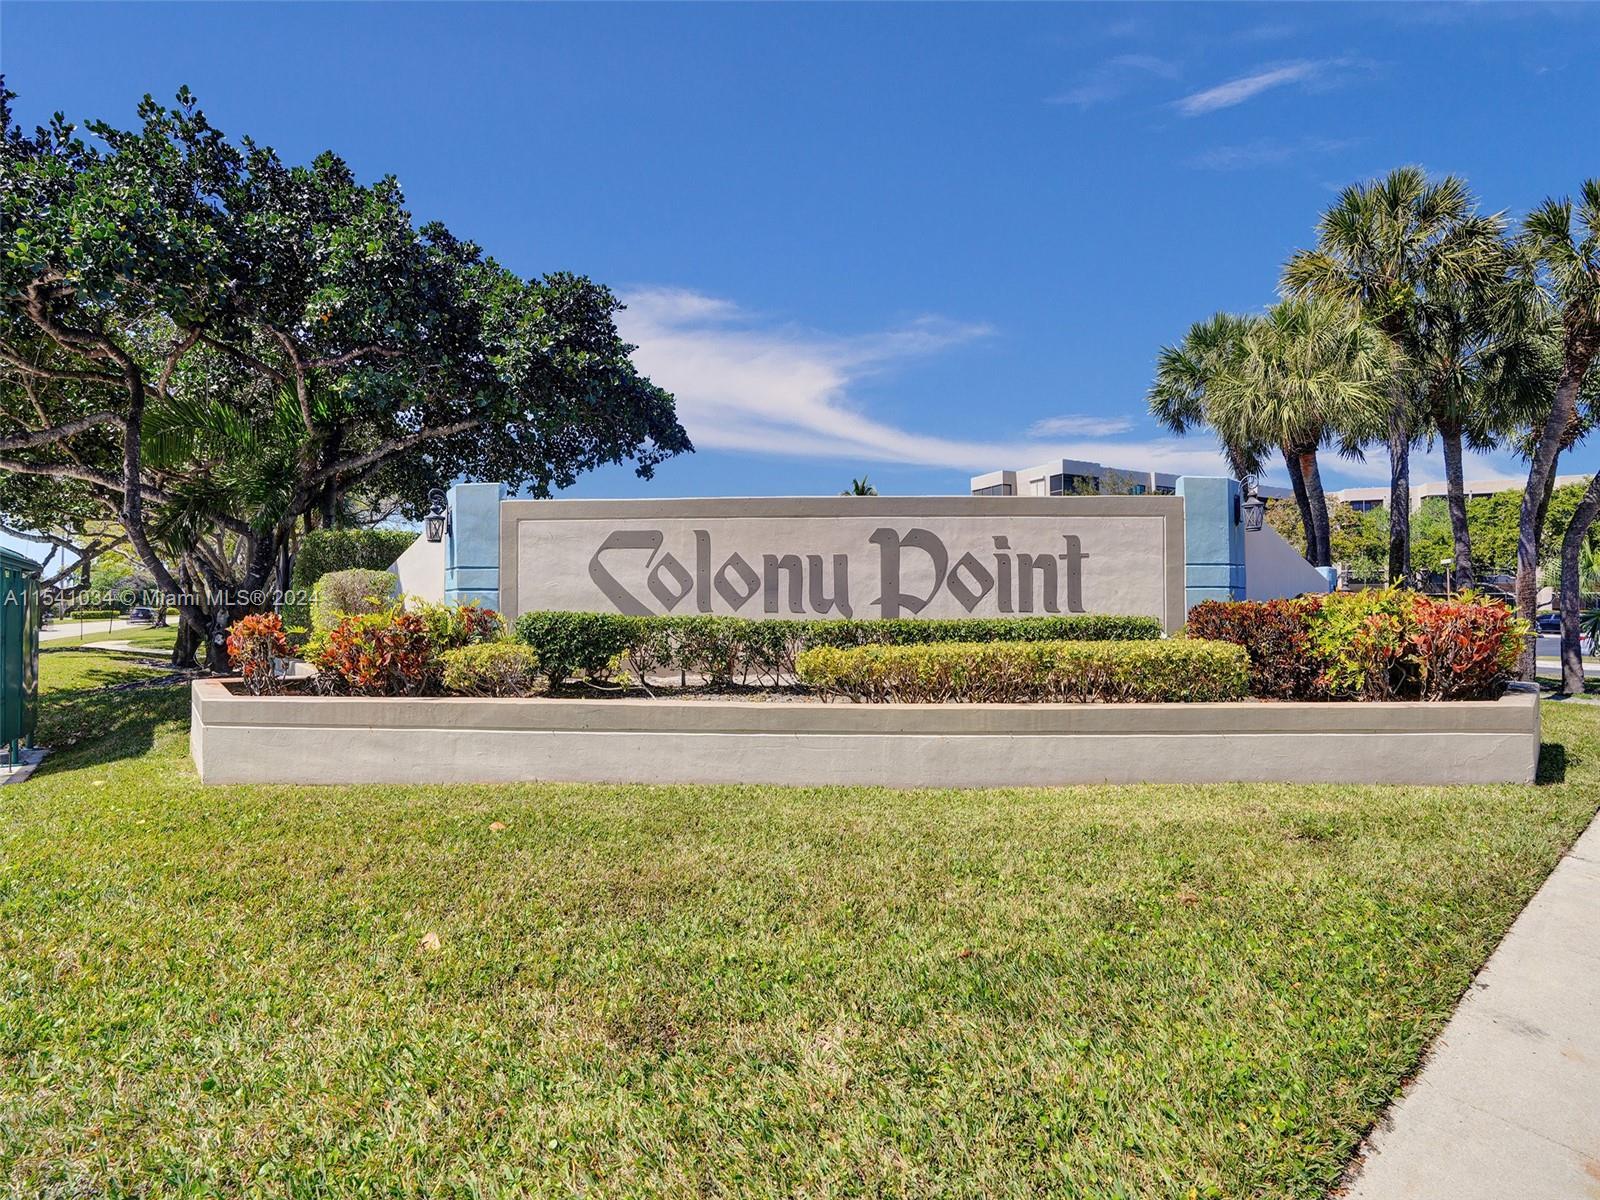 Photo of 1101 Colony Point Cir #123 in Pembroke Pines, FL